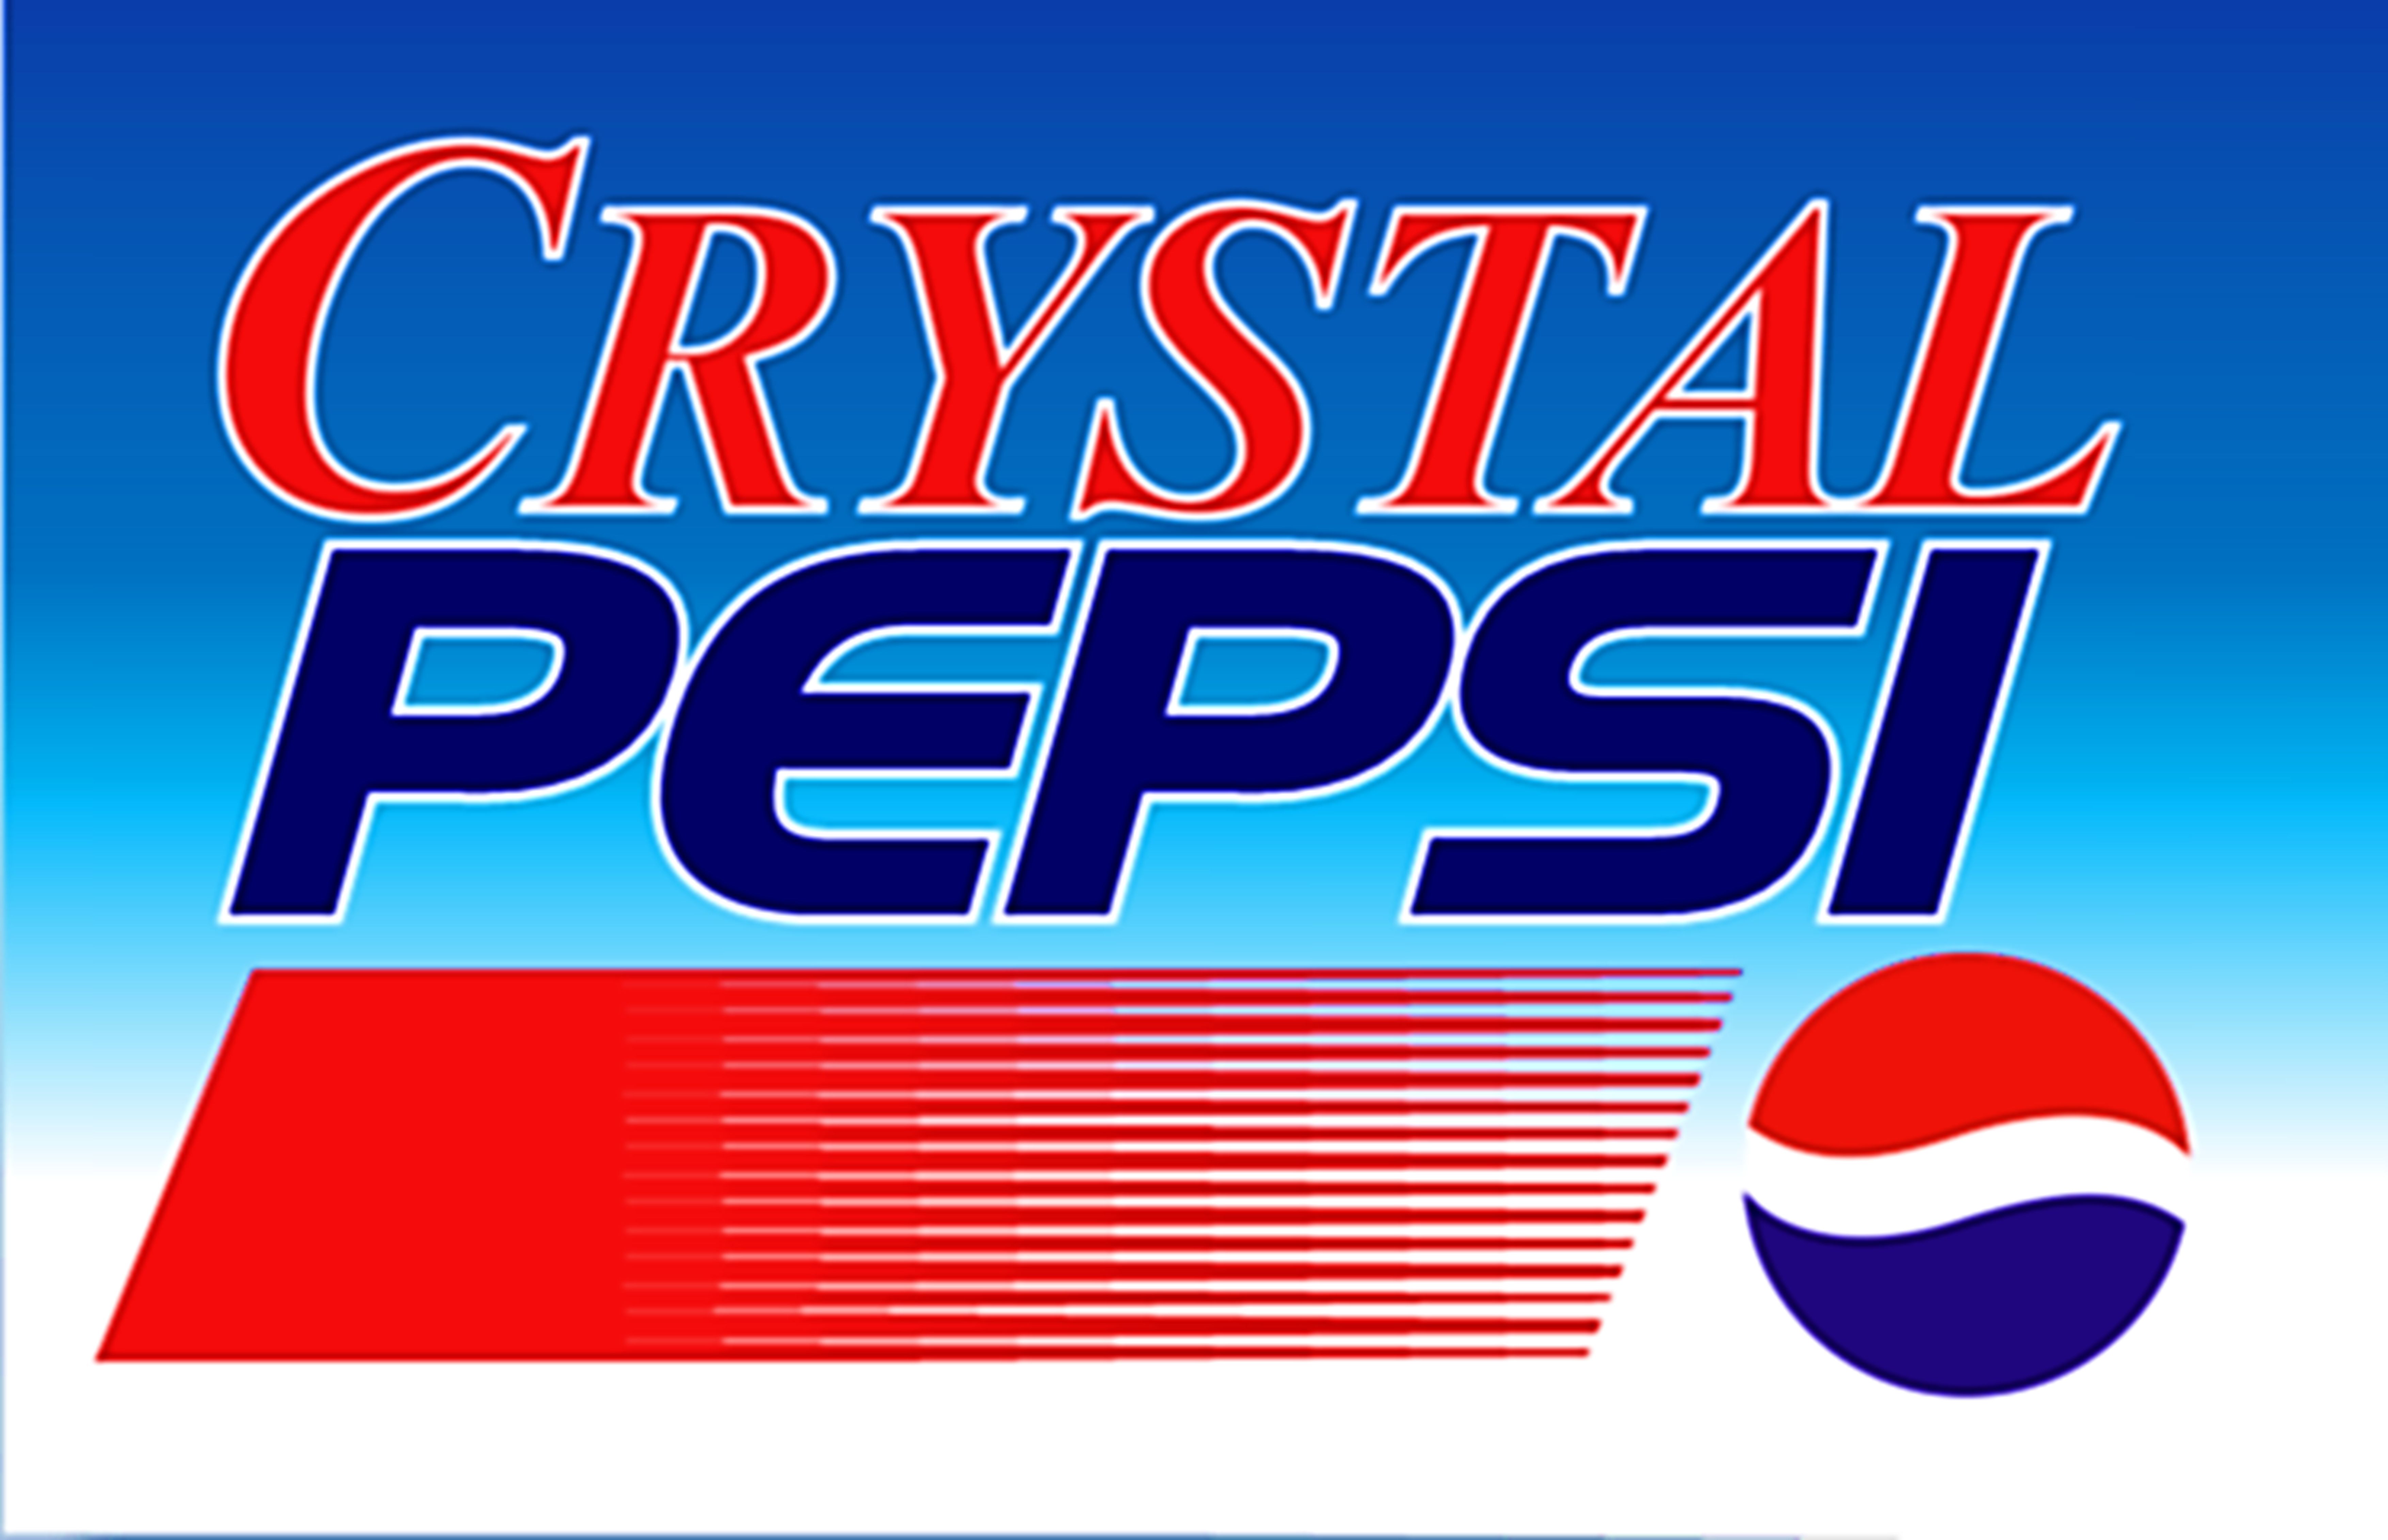 products, pepsi